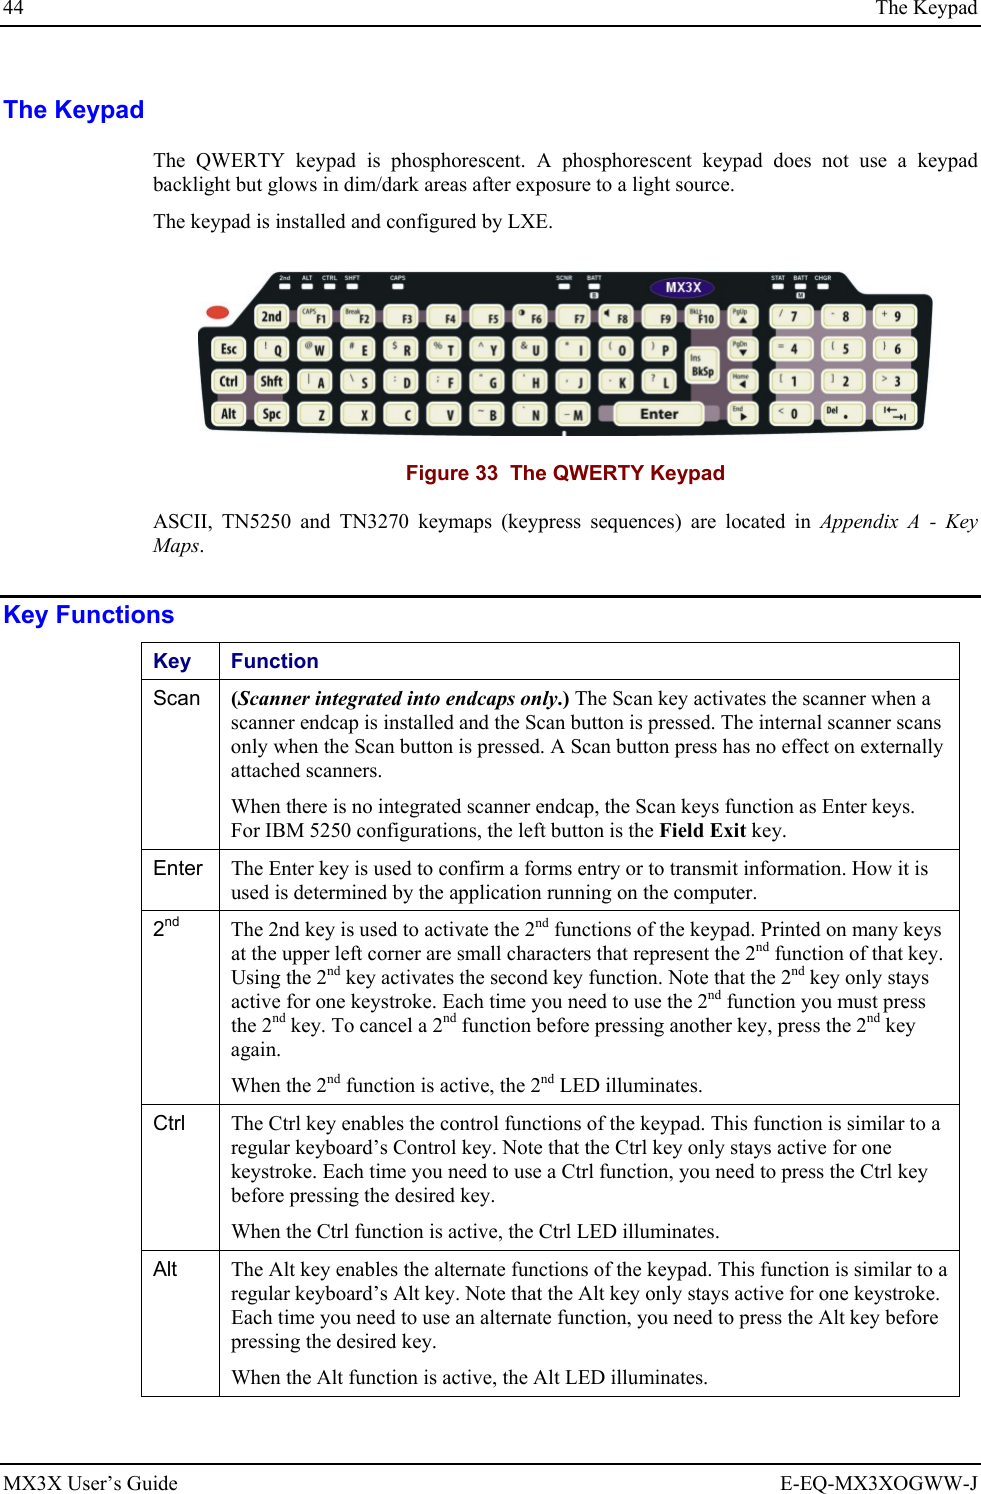 44  The Keypad MX3X User’s Guide  E-EQ-MX3XOGWW-J The Keypad The QWERTY keypad is phosphorescent. A phosphorescent keypad does not use a keypad backlight but glows in dim/dark areas after exposure to a light source. The keypad is installed and configured by LXE.   Figure 33  The QWERTY Keypad ASCII, TN5250 and TN3270 keymaps (keypress sequences) are located in Appendix A - Key Maps.  Key Functions Key Function Scan  (Scanner integrated into endcaps only.) The Scan key activates the scanner when a scanner endcap is installed and the Scan button is pressed. The internal scanner scans only when the Scan button is pressed. A Scan button press has no effect on externally attached scanners.  When there is no integrated scanner endcap, the Scan keys function as Enter keys. For IBM 5250 configurations, the left button is the Field Exit key. Enter  The Enter key is used to confirm a forms entry or to transmit information. How it is used is determined by the application running on the computer. 2nd The 2nd key is used to activate the 2nd functions of the keypad. Printed on many keys at the upper left corner are small characters that represent the 2nd function of that key. Using the 2nd key activates the second key function. Note that the 2nd key only stays active for one keystroke. Each time you need to use the 2nd function you must press the 2nd key. To cancel a 2nd function before pressing another key, press the 2nd key again.  When the 2nd function is active, the 2nd LED illuminates. Ctrl  The Ctrl key enables the control functions of the keypad. This function is similar to a regular keyboard’s Control key. Note that the Ctrl key only stays active for one keystroke. Each time you need to use a Ctrl function, you need to press the Ctrl key before pressing the desired key.  When the Ctrl function is active, the Ctrl LED illuminates. Alt  The Alt key enables the alternate functions of the keypad. This function is similar to a regular keyboard’s Alt key. Note that the Alt key only stays active for one keystroke. Each time you need to use an alternate function, you need to press the Alt key before pressing the desired key.  When the Alt function is active, the Alt LED illuminates. 